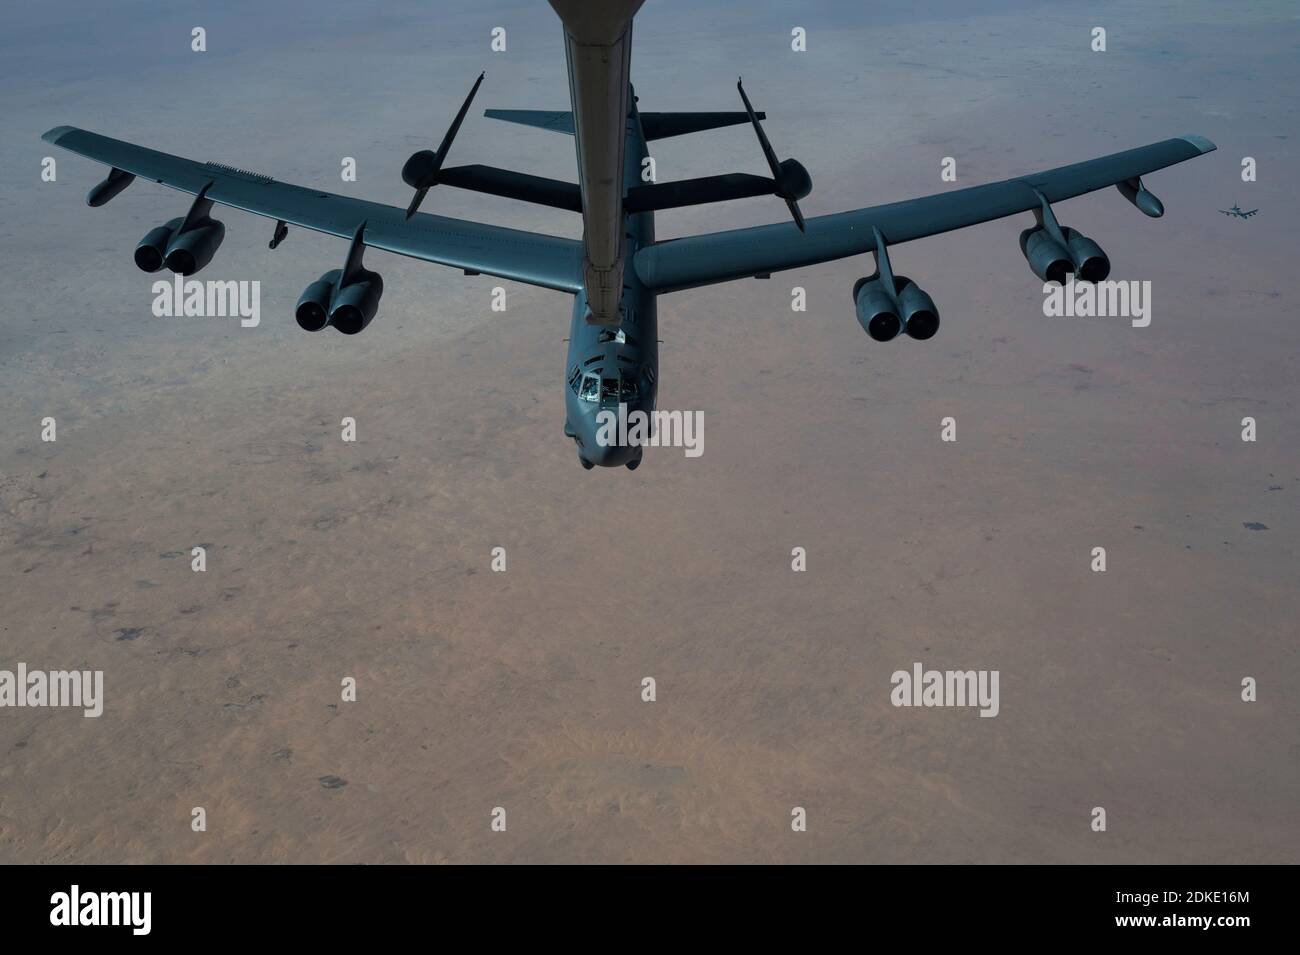 A U.S. Air Force B-52 Stratofortress strategic bomber aircraft from the 2nd Bomb Wing, is refueled inflight from a KC-135 Stratotanker aircraft during a multi-day Bomber Task Force mission December 10, 2020 over Qatar. The bomber was relocated to the region following an increase in tensions with Iran. Stock Photo